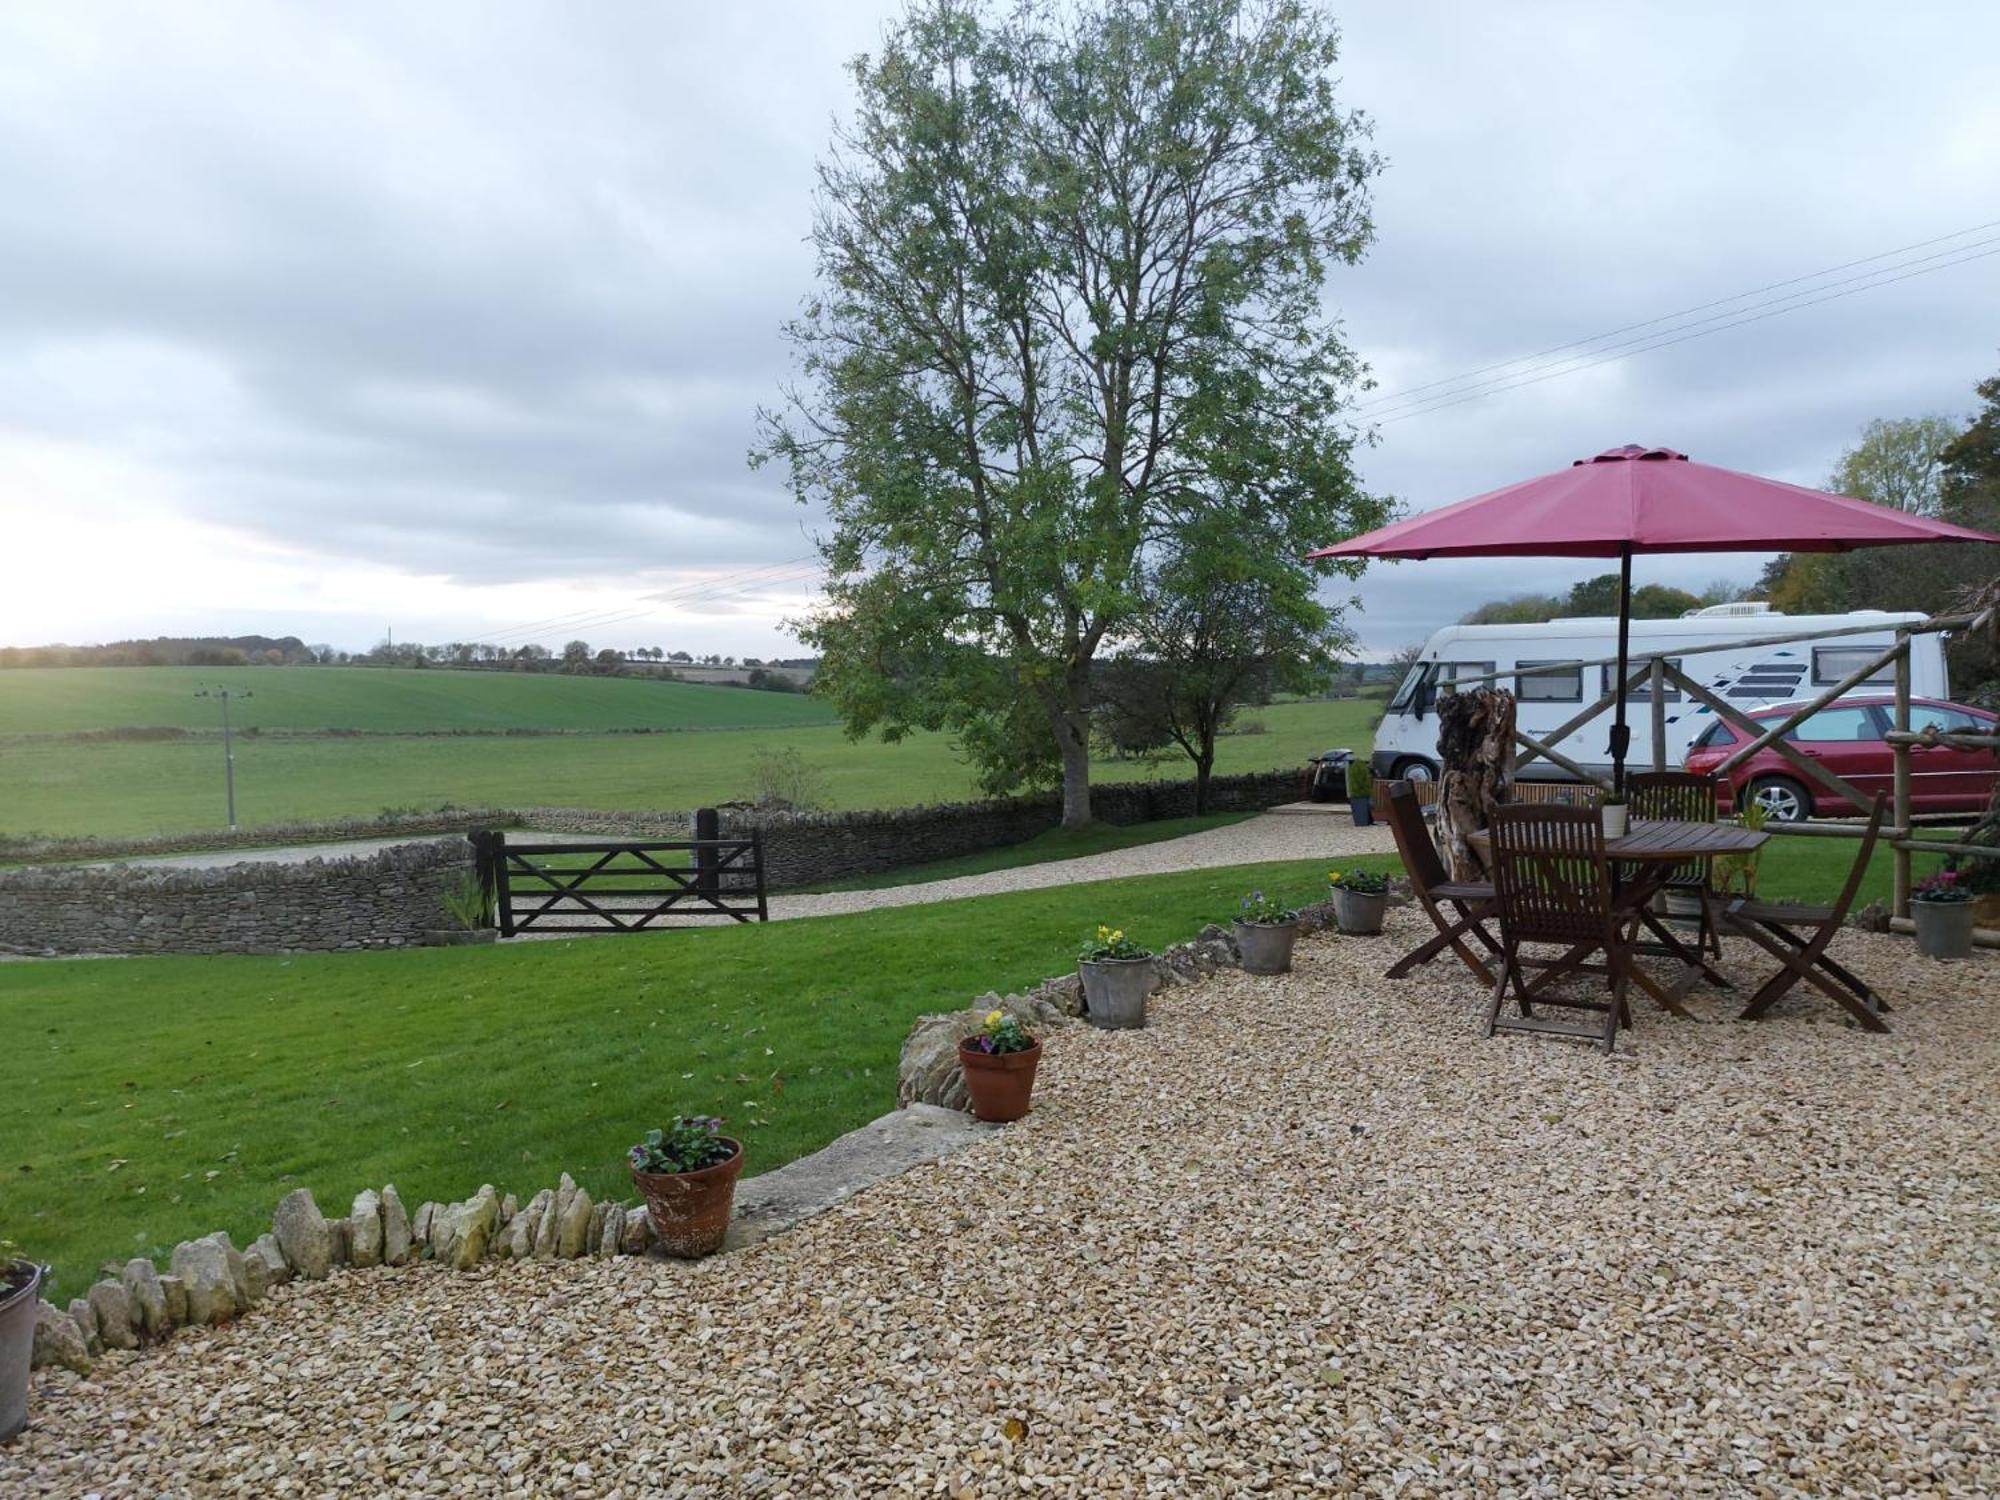 Thames Head Wharf - Historic Cotswold Cottage With Stunning Countryside Views 赛伦塞斯特 外观 照片